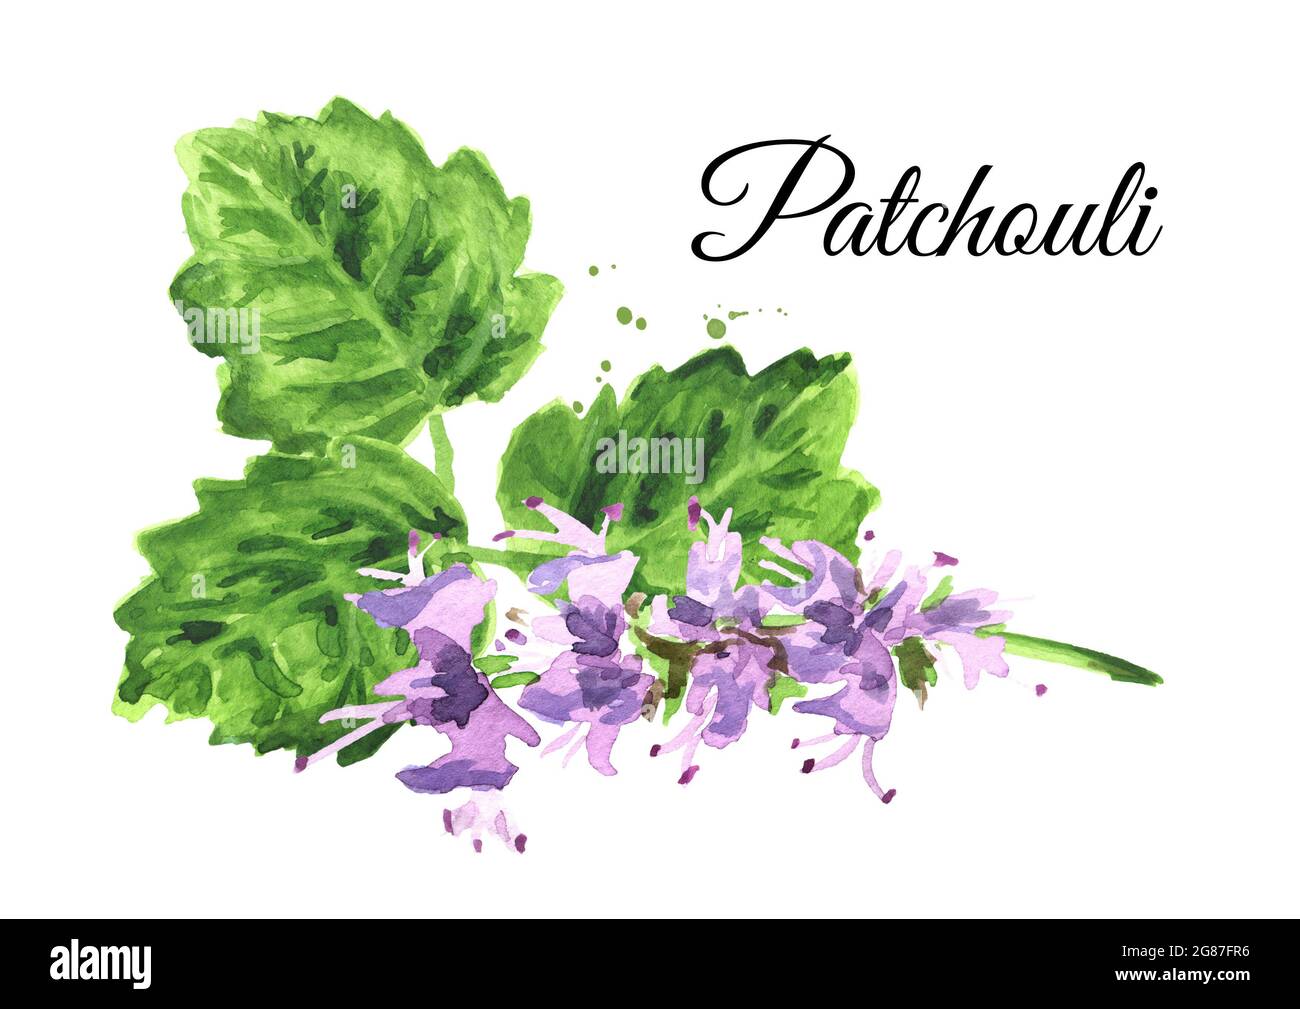 Plant patchouli or Pogostemon cablini,  flowers and leaves, Hand drawn watercolor illustration isolated on white background Stock Photo